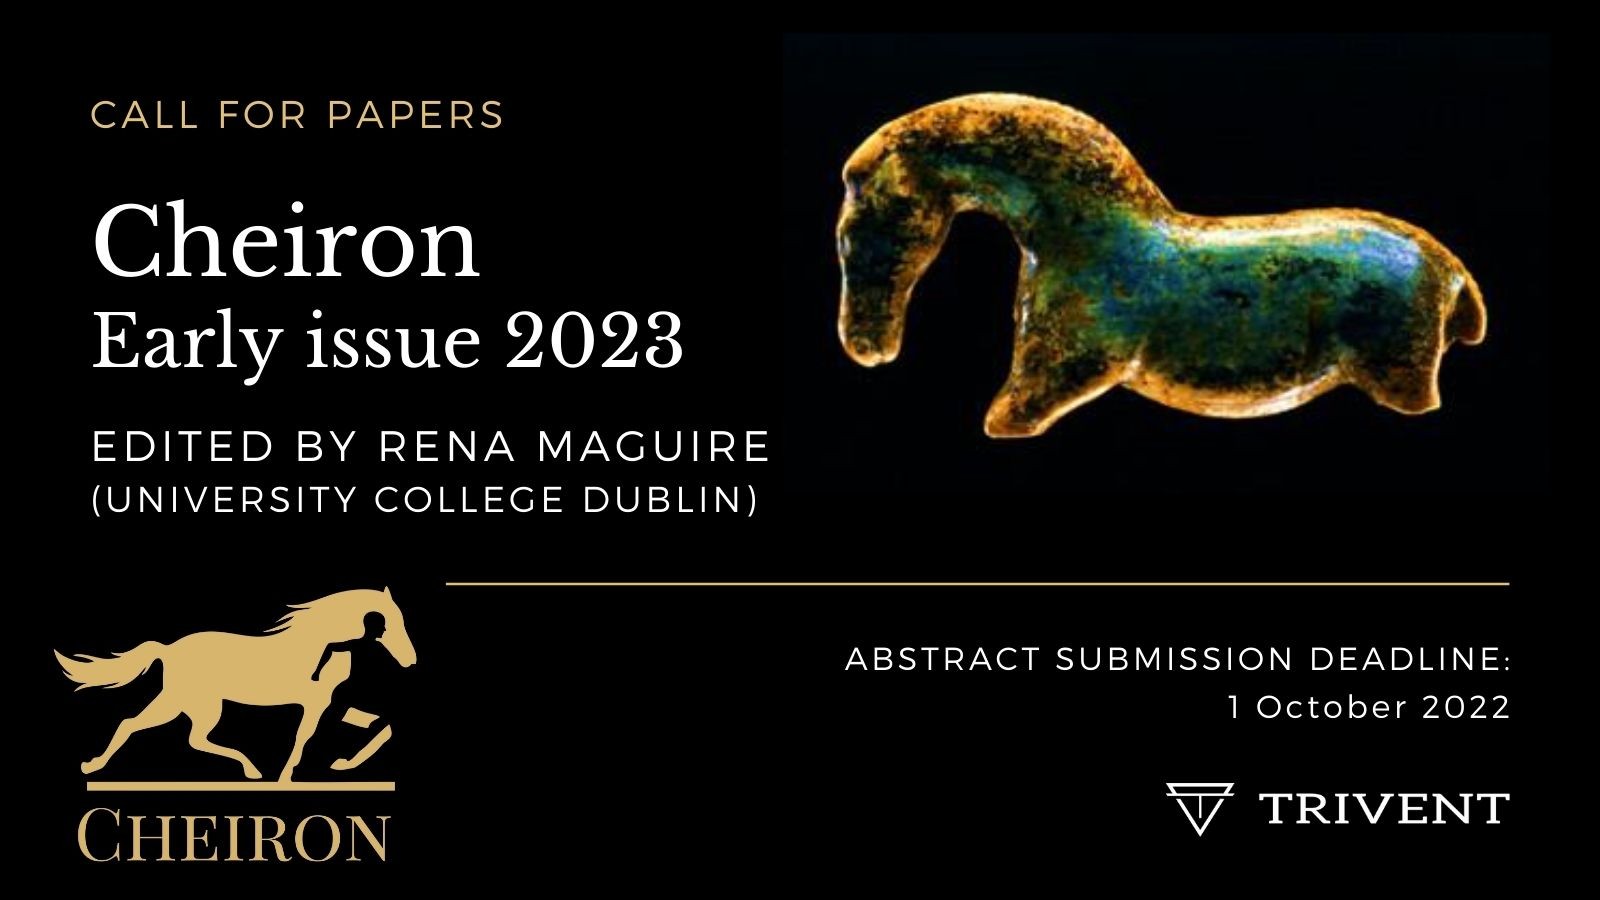 Cheiron Journal - Call for Papers